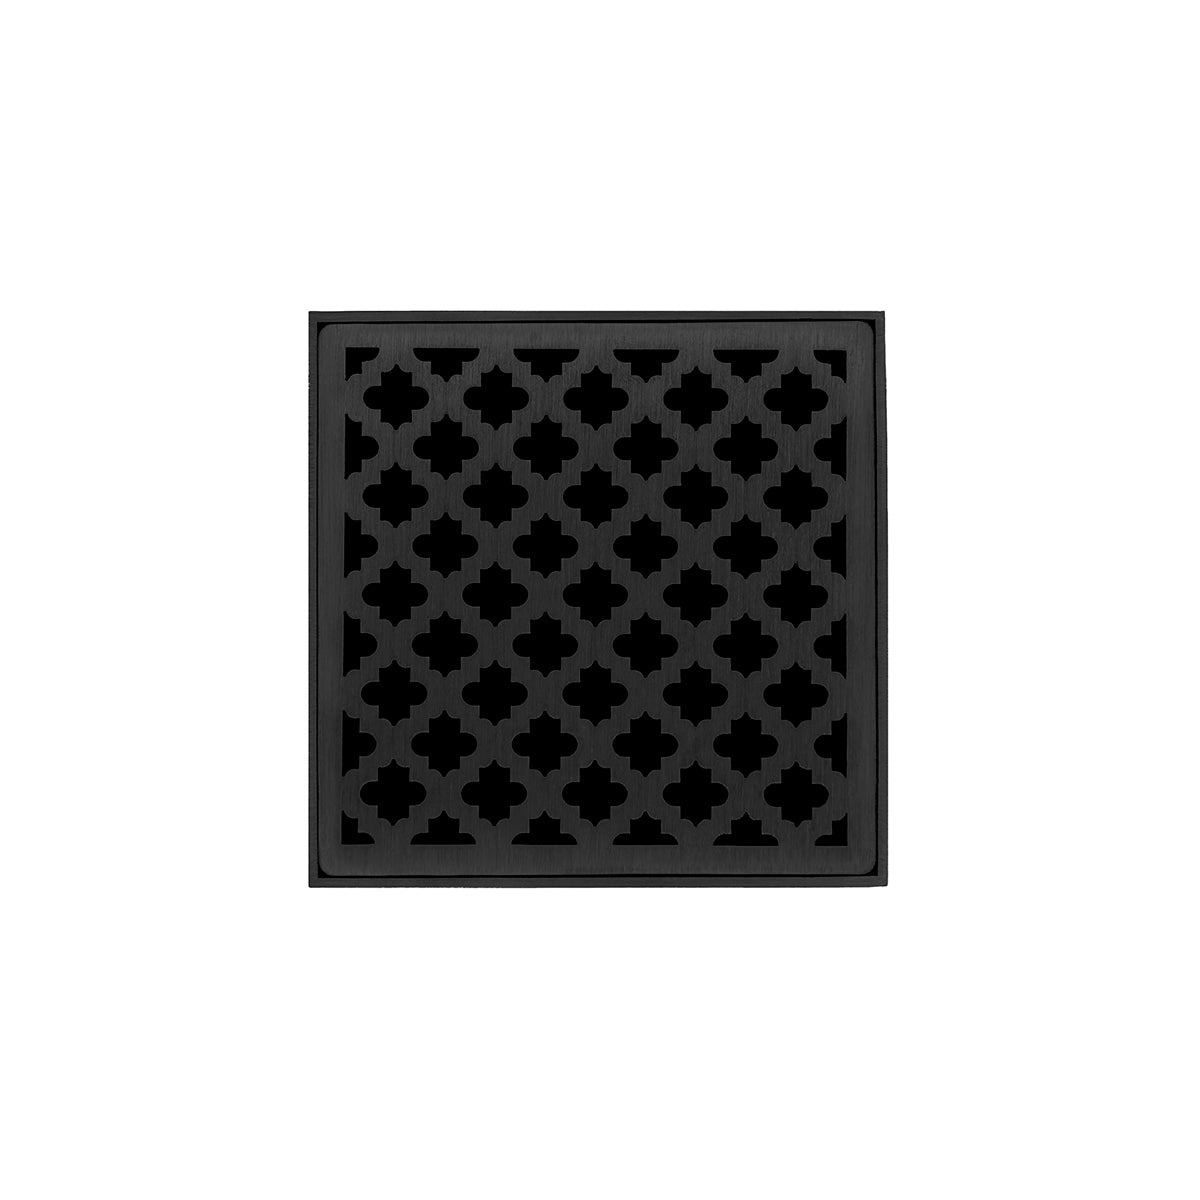 Infinity Drain 4" x 4" MD 4 Premium Center Drain Kit with Moor Pattern Decorative Plate with Cast Iron Drain Body, 2" Outlet